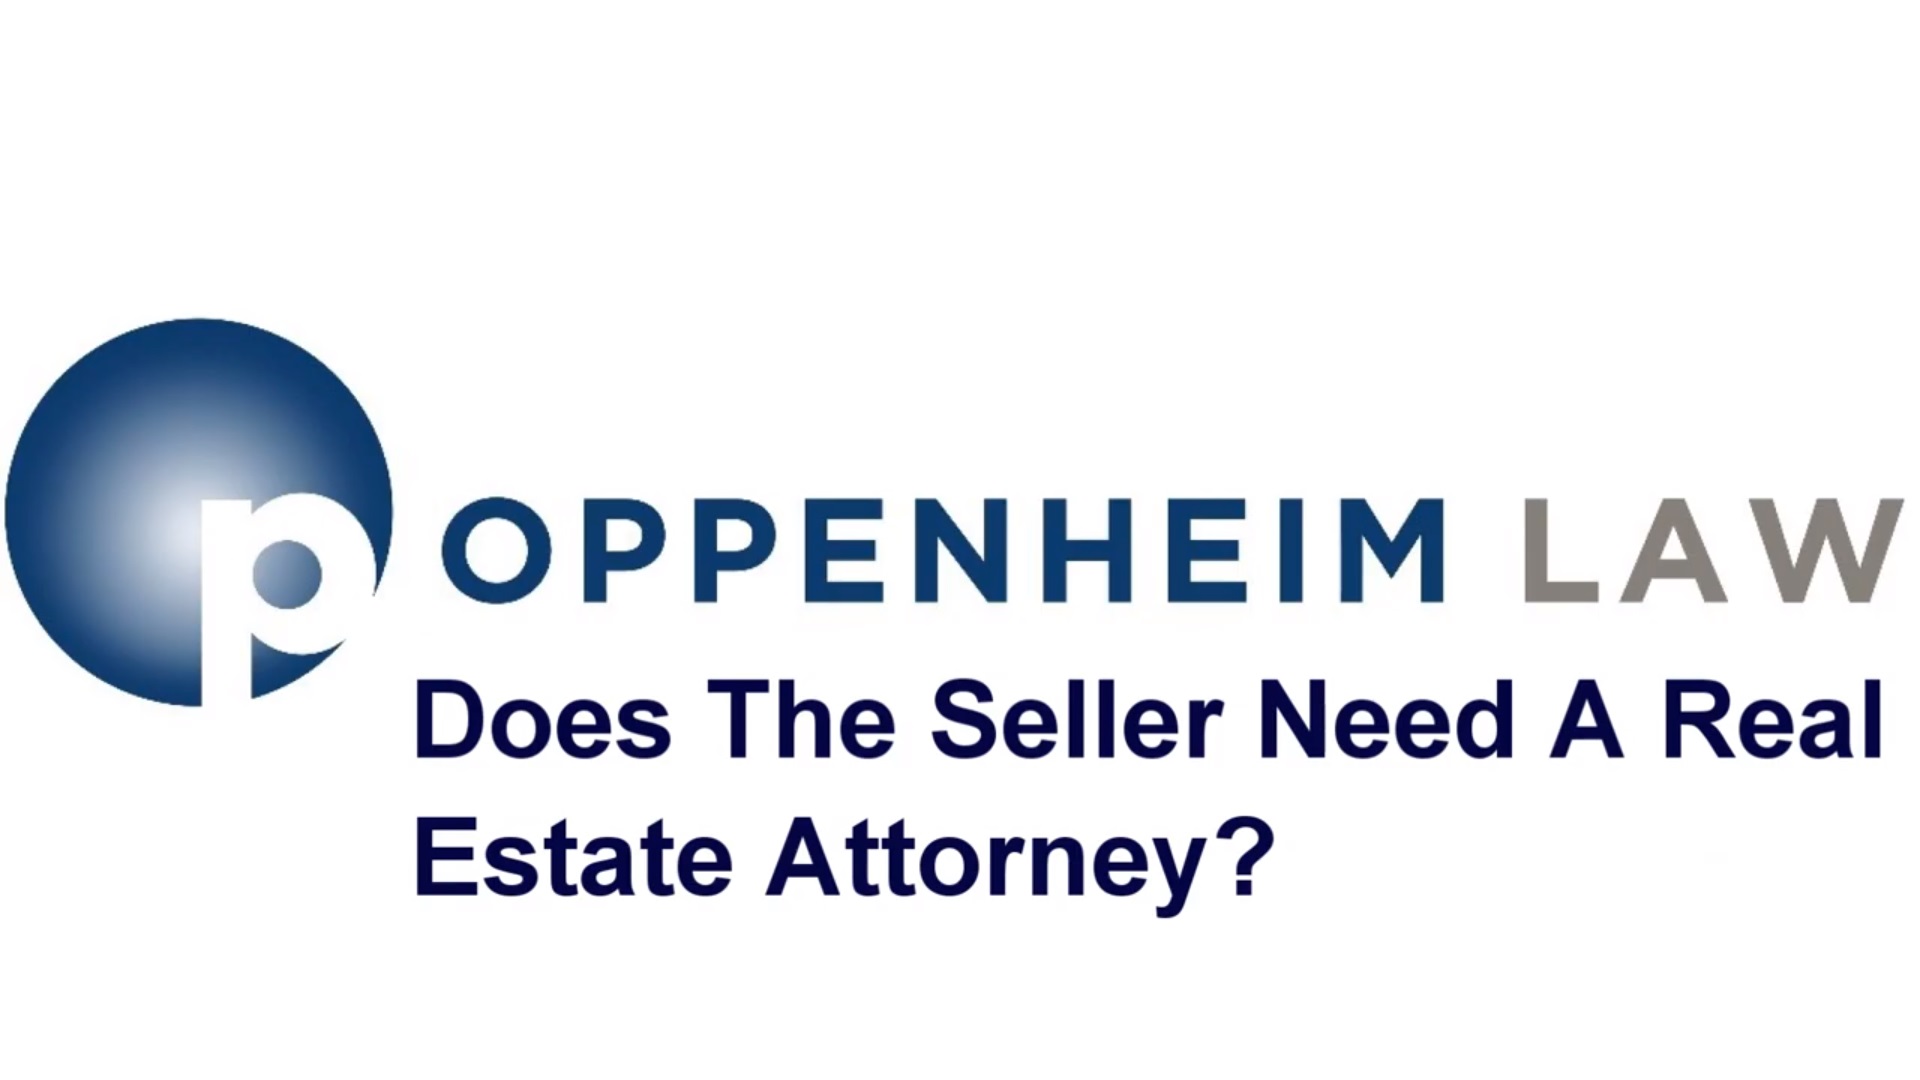 Does The Seller Need A Real Estate Attorney?